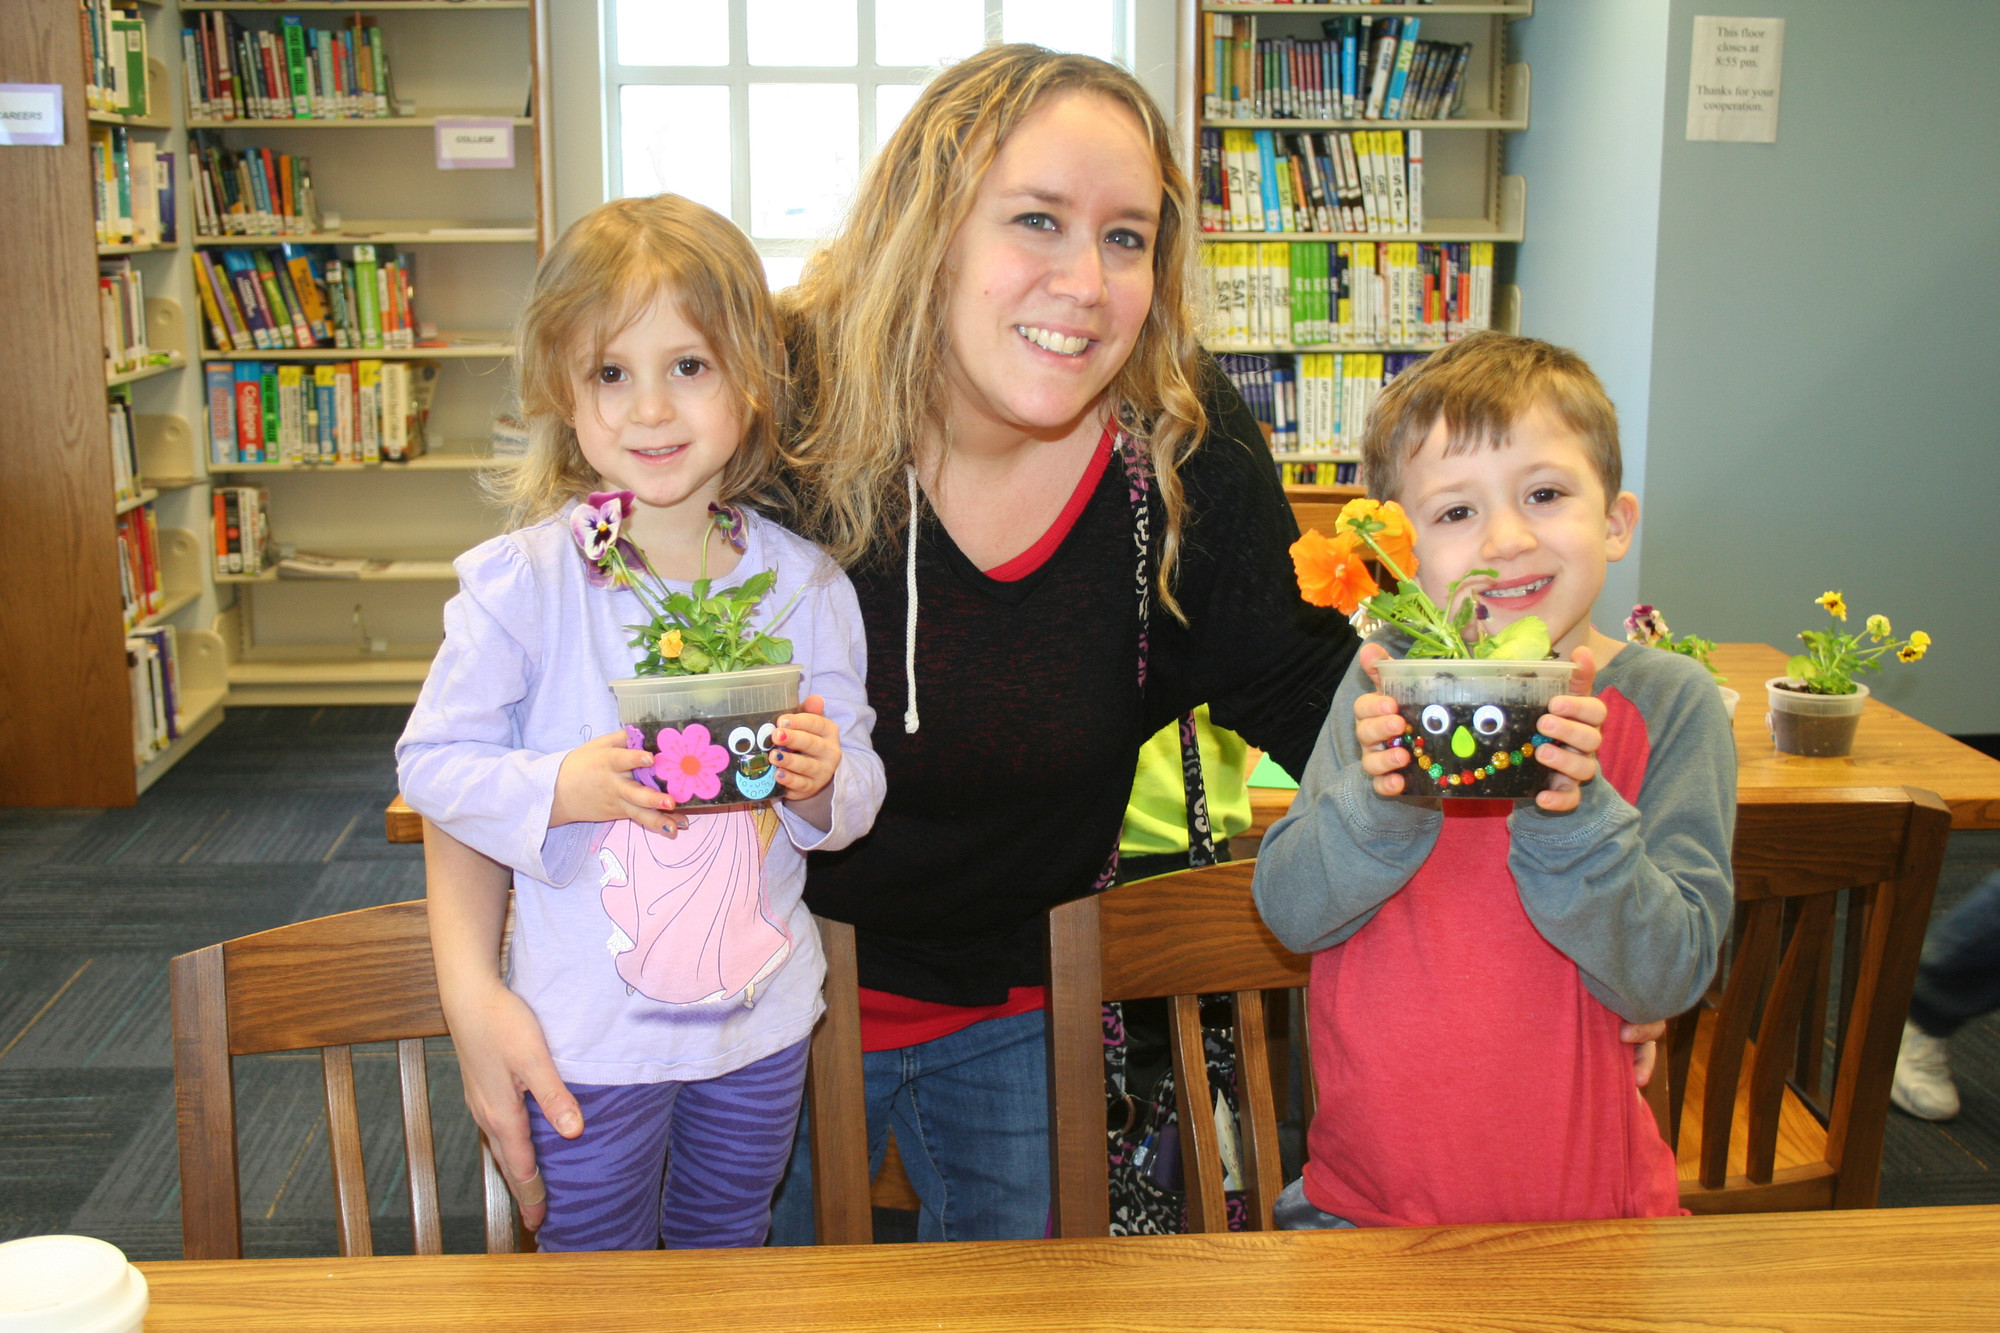 Melanie Wanger and her children, Violet, 4, and Skyler, 6, with their happy pansy pots.